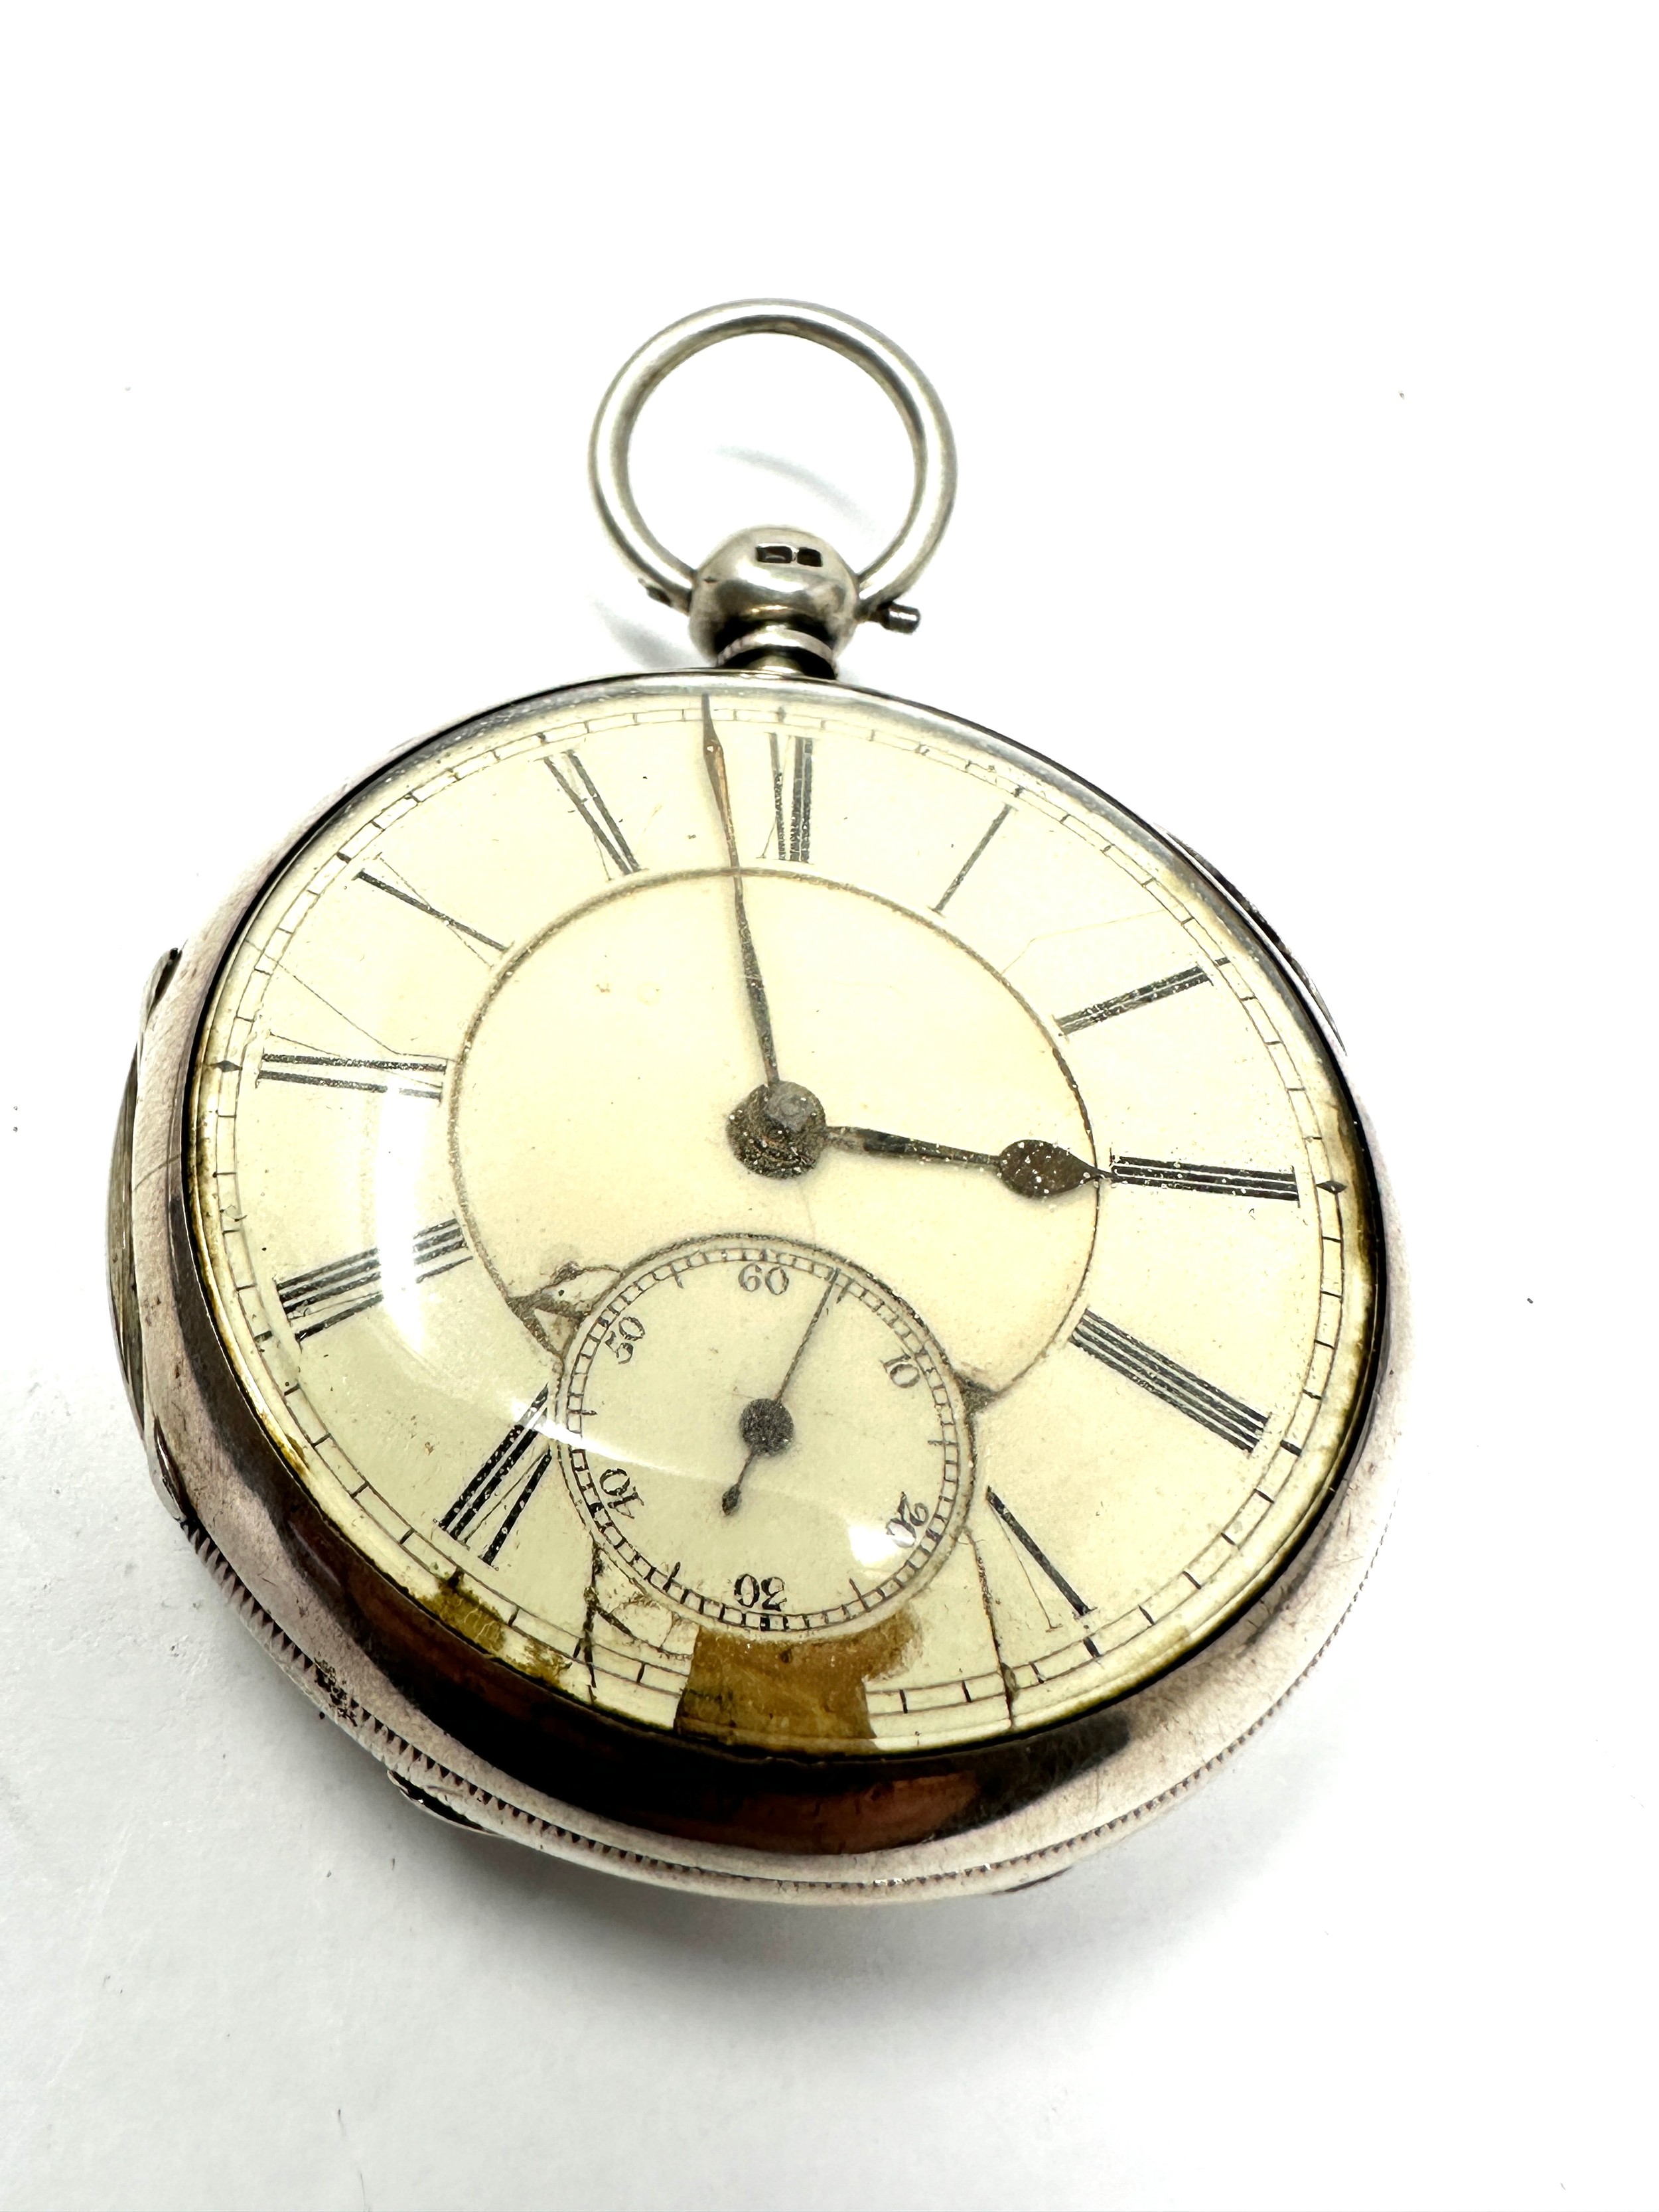 STERLING SILVER Cased Gents Antique Fusee POCKET WATCH Key-wind WORKING